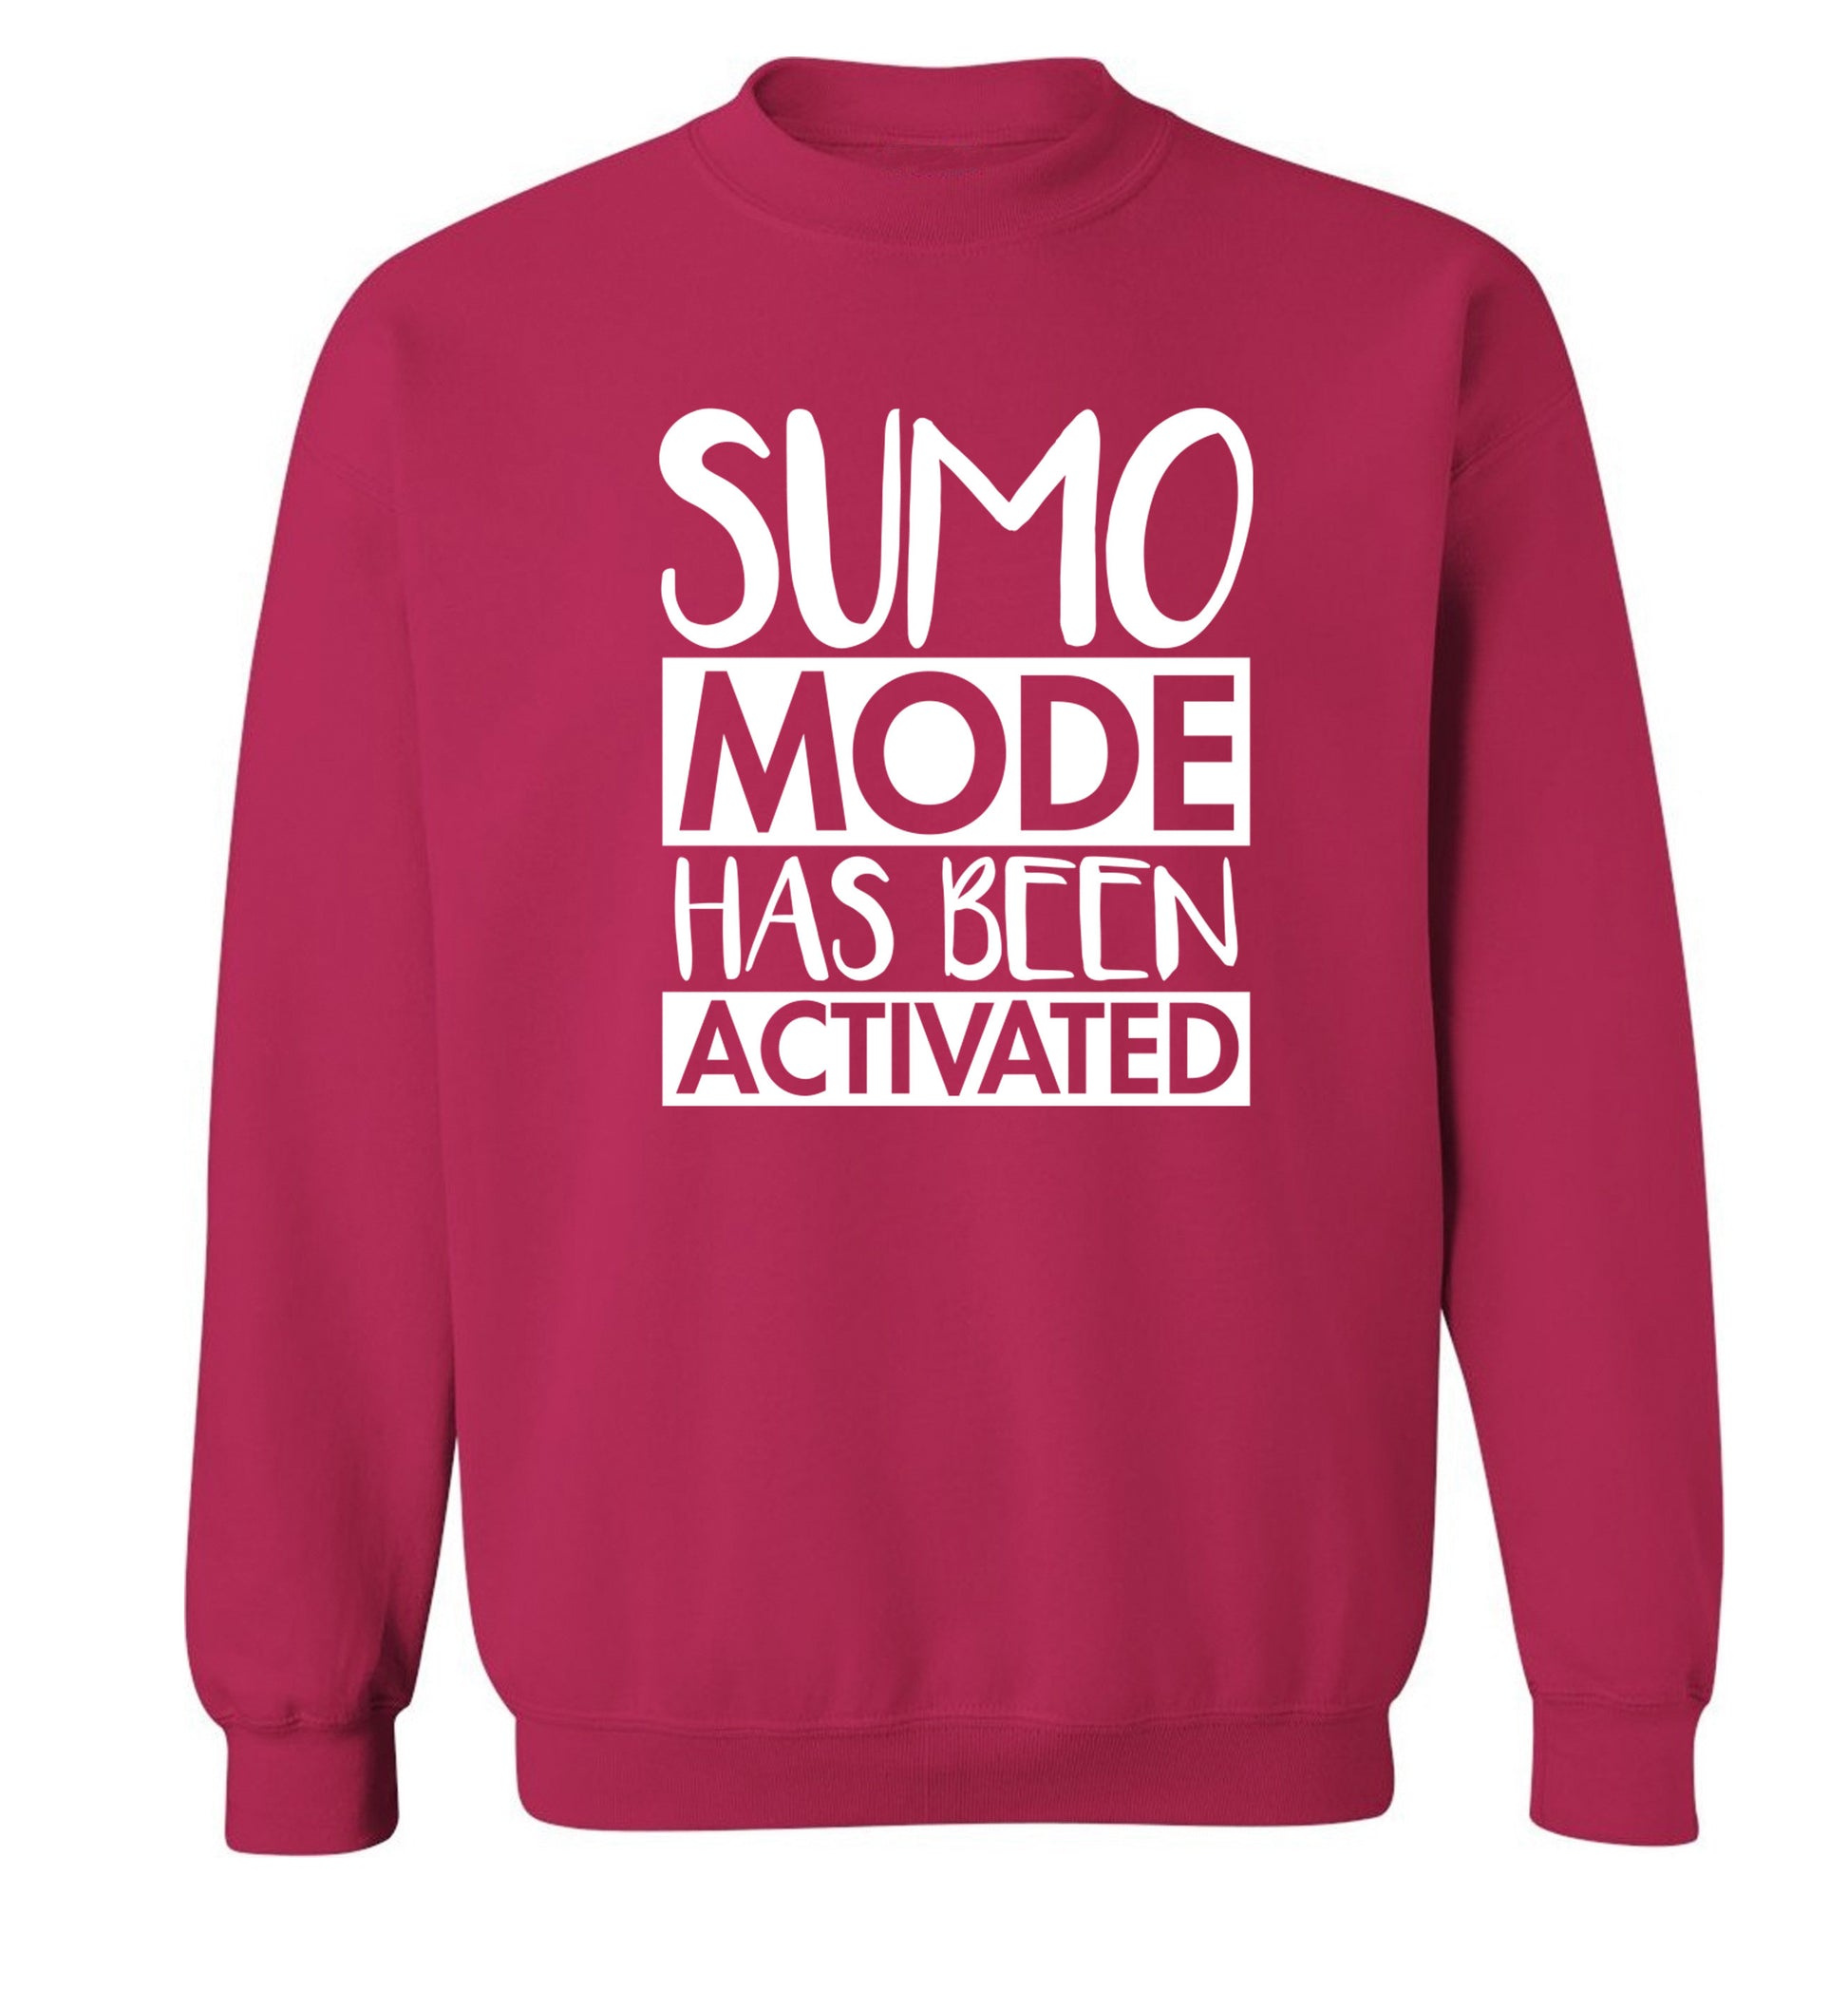 Sumo mode activated Adult's unisex pink Sweater 2XL